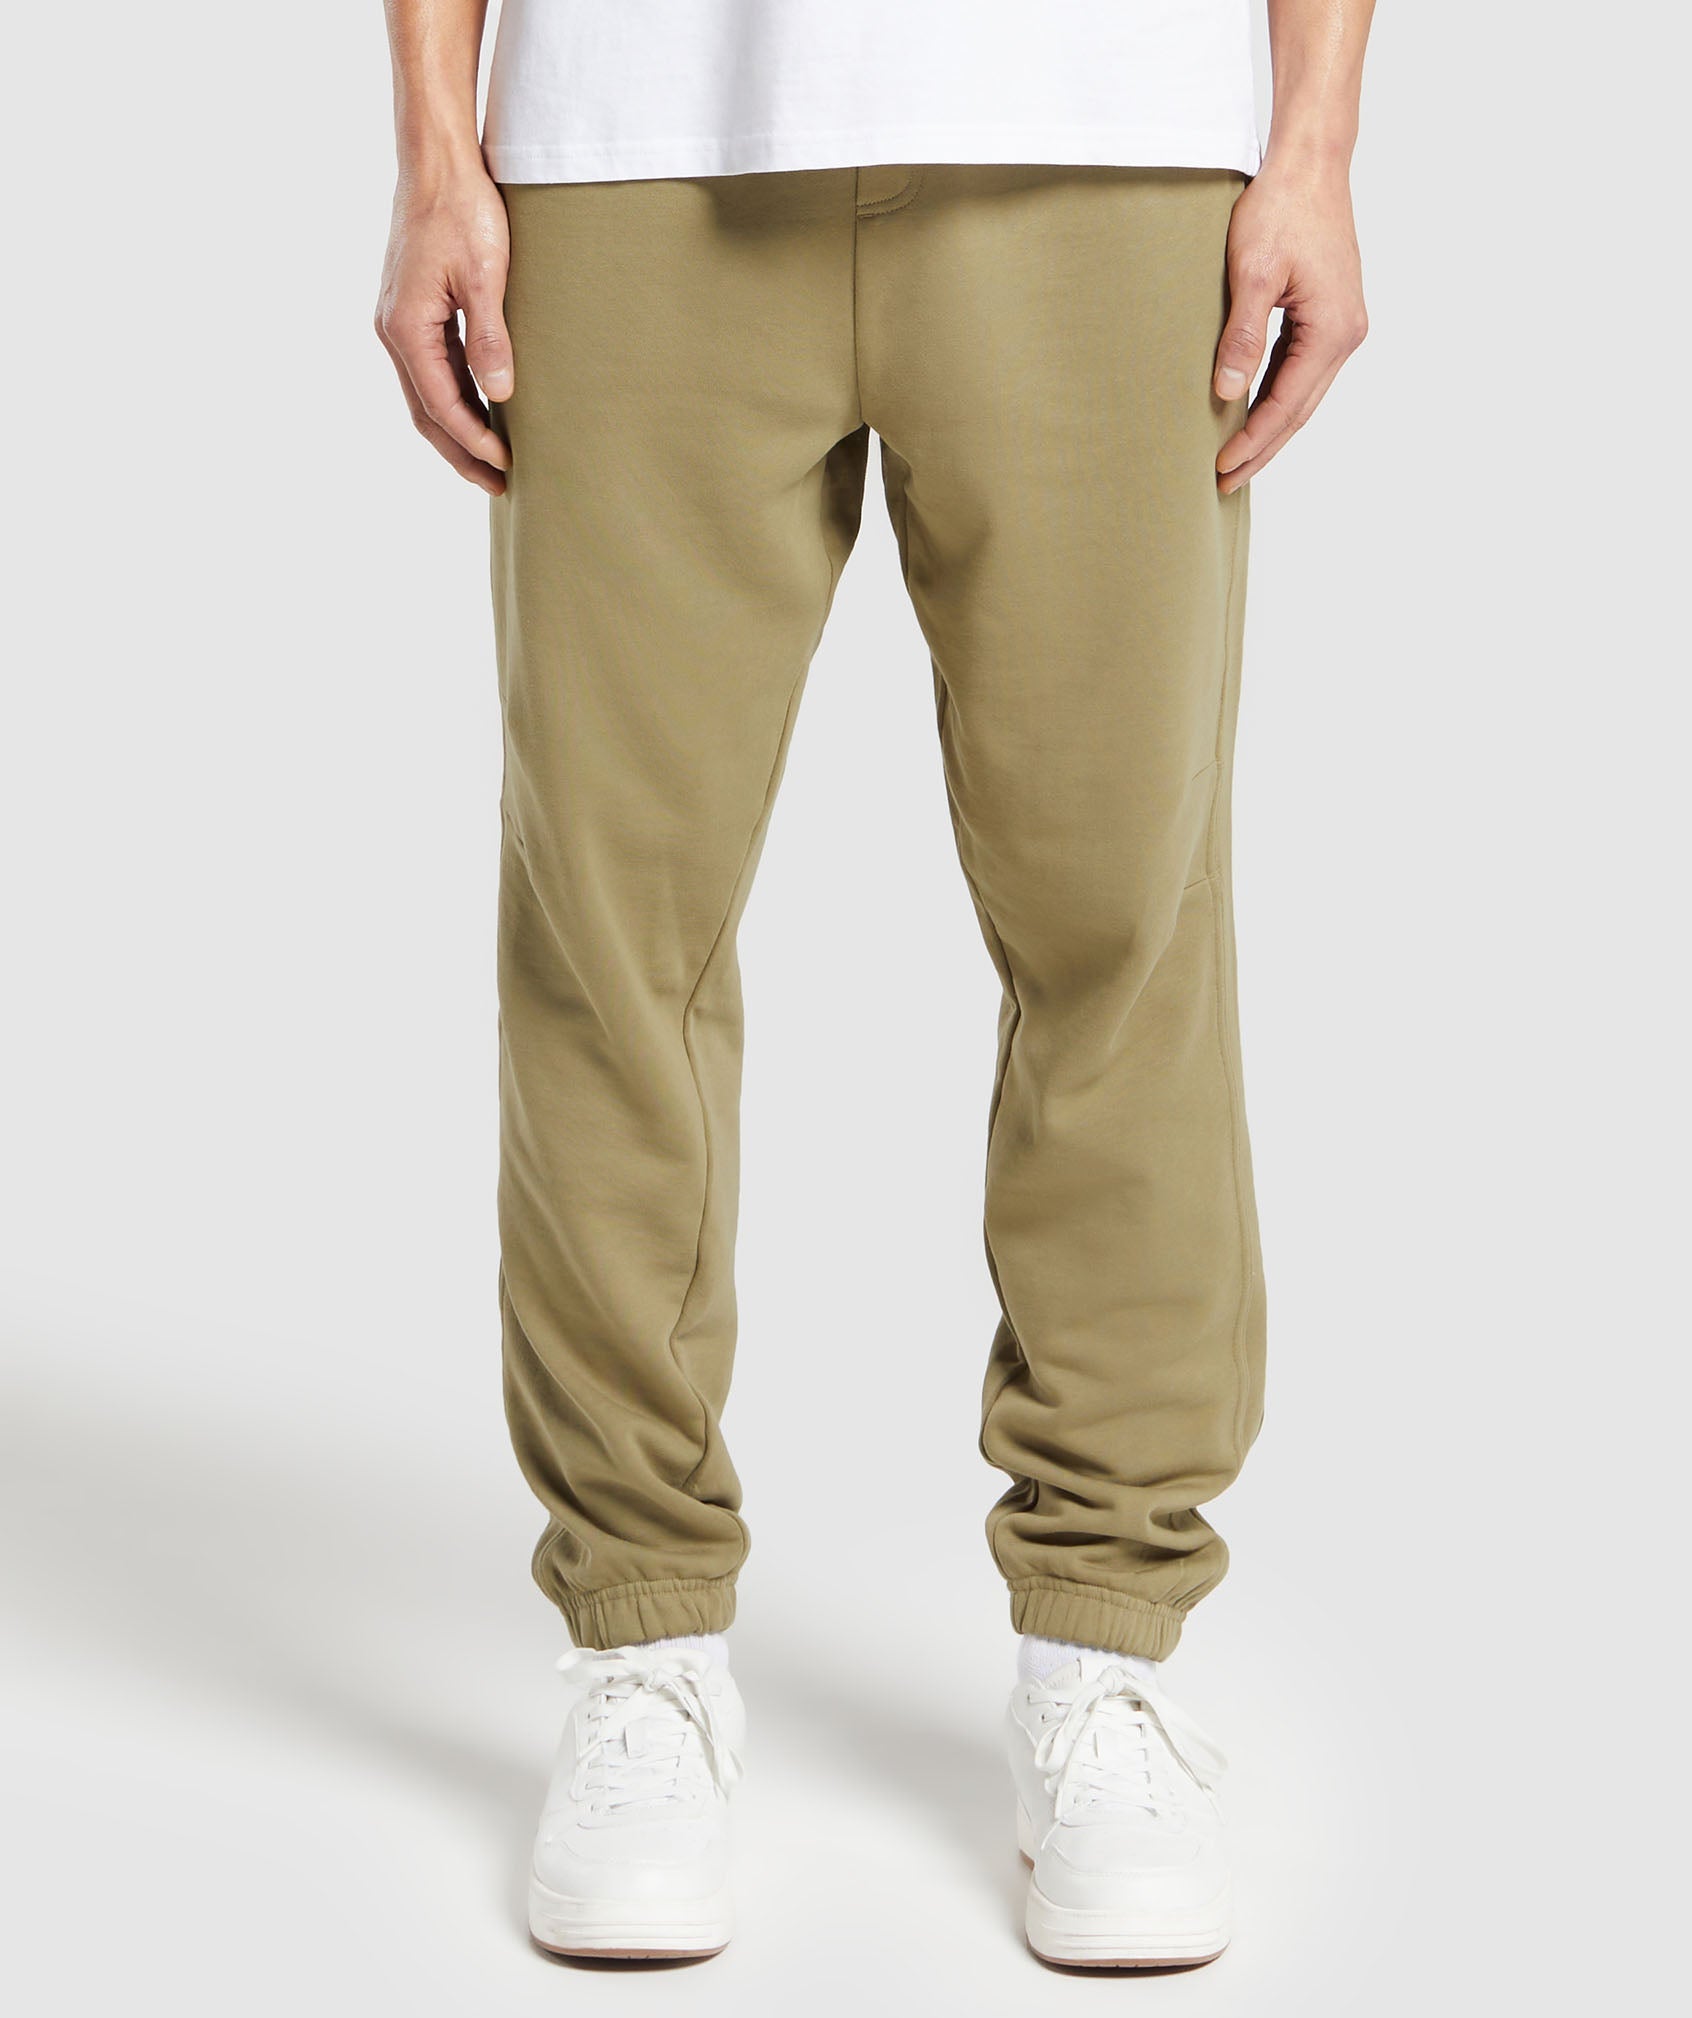 Rest Day Essentials Joggers in Troop Green - view 1